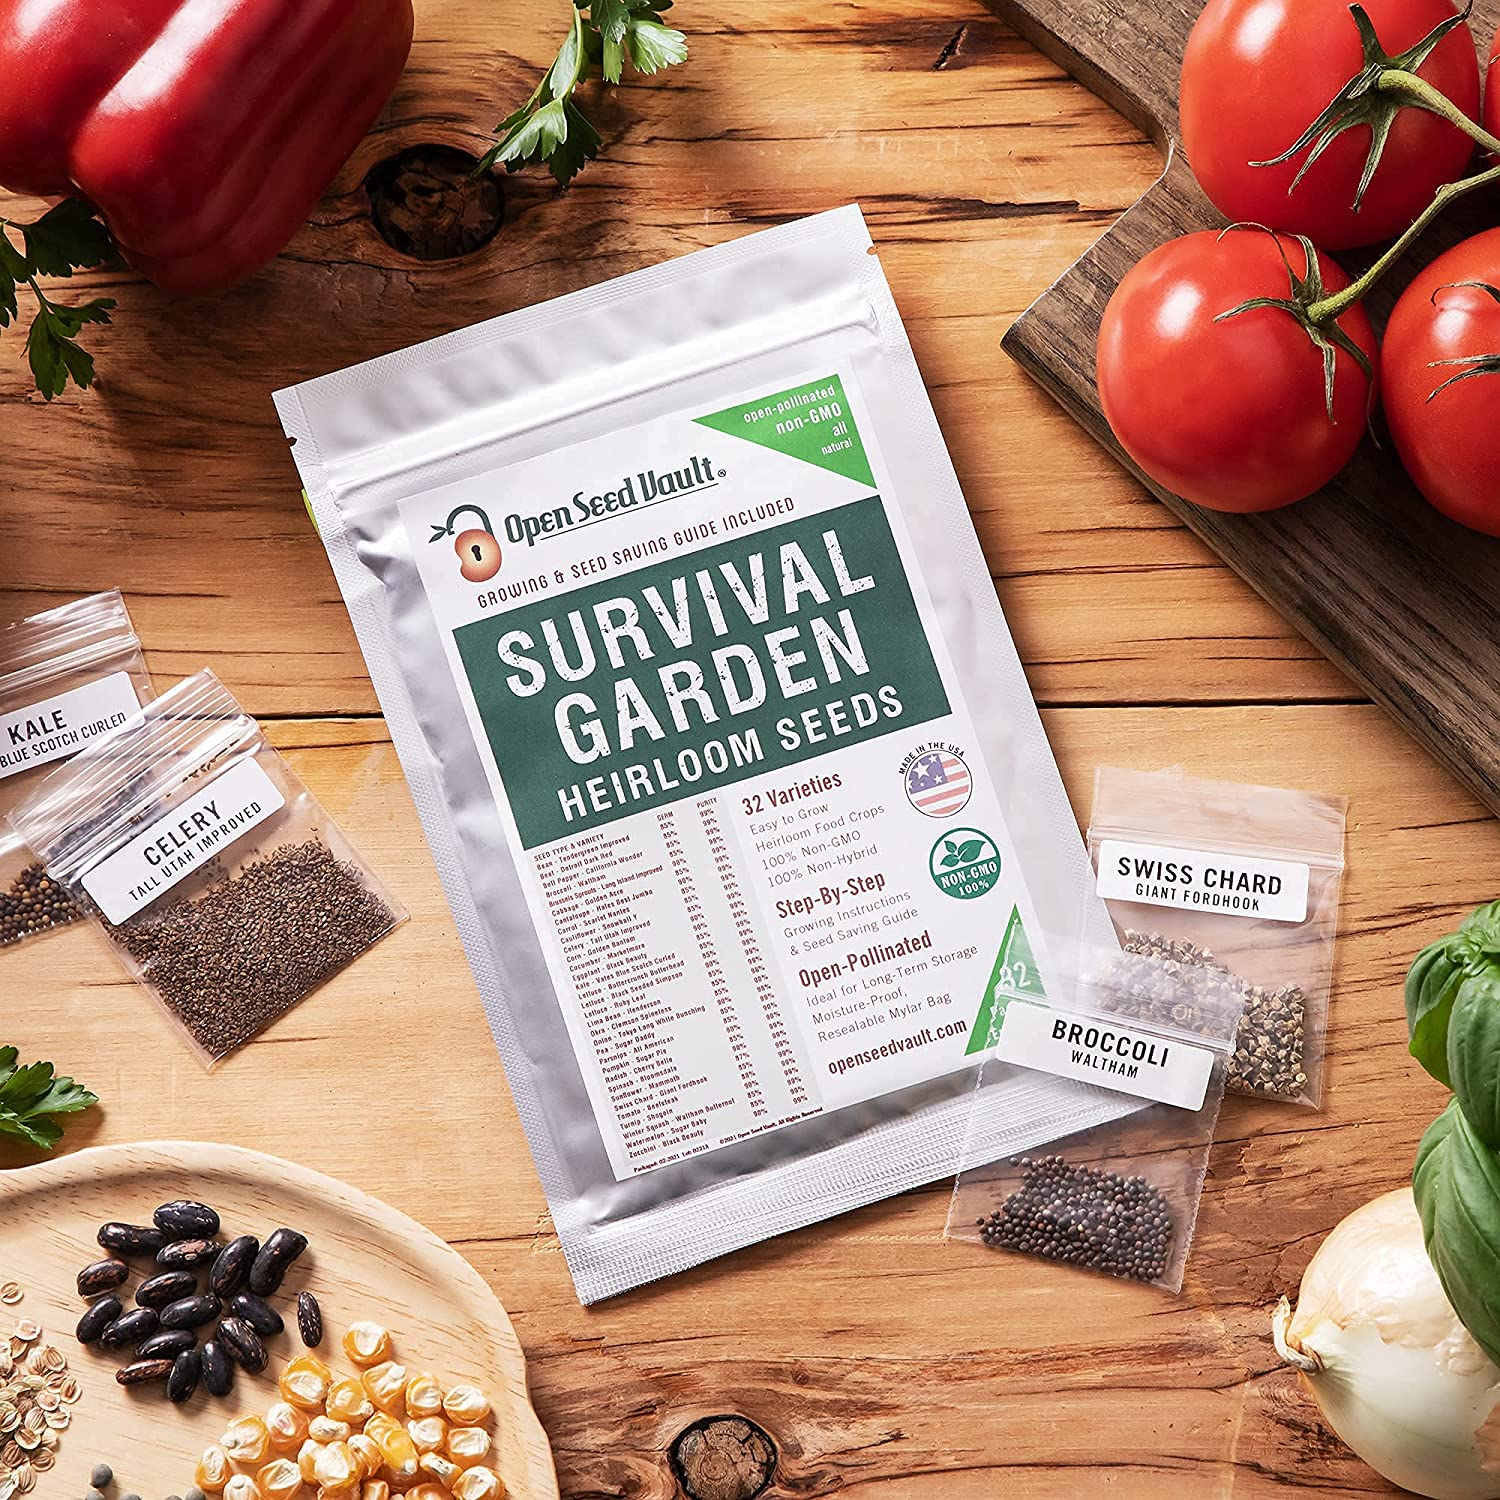 (32) Variety Pack Survival Gear Food Seeds | 15,000 Non GMO Heirloom Seeds for Planting Vegetables and Fruits. Survival Food for Your Survival Kit, Gardening Gifts & Emergency Supplies | Garden Vegetable Seeds. by Open Seed Vault